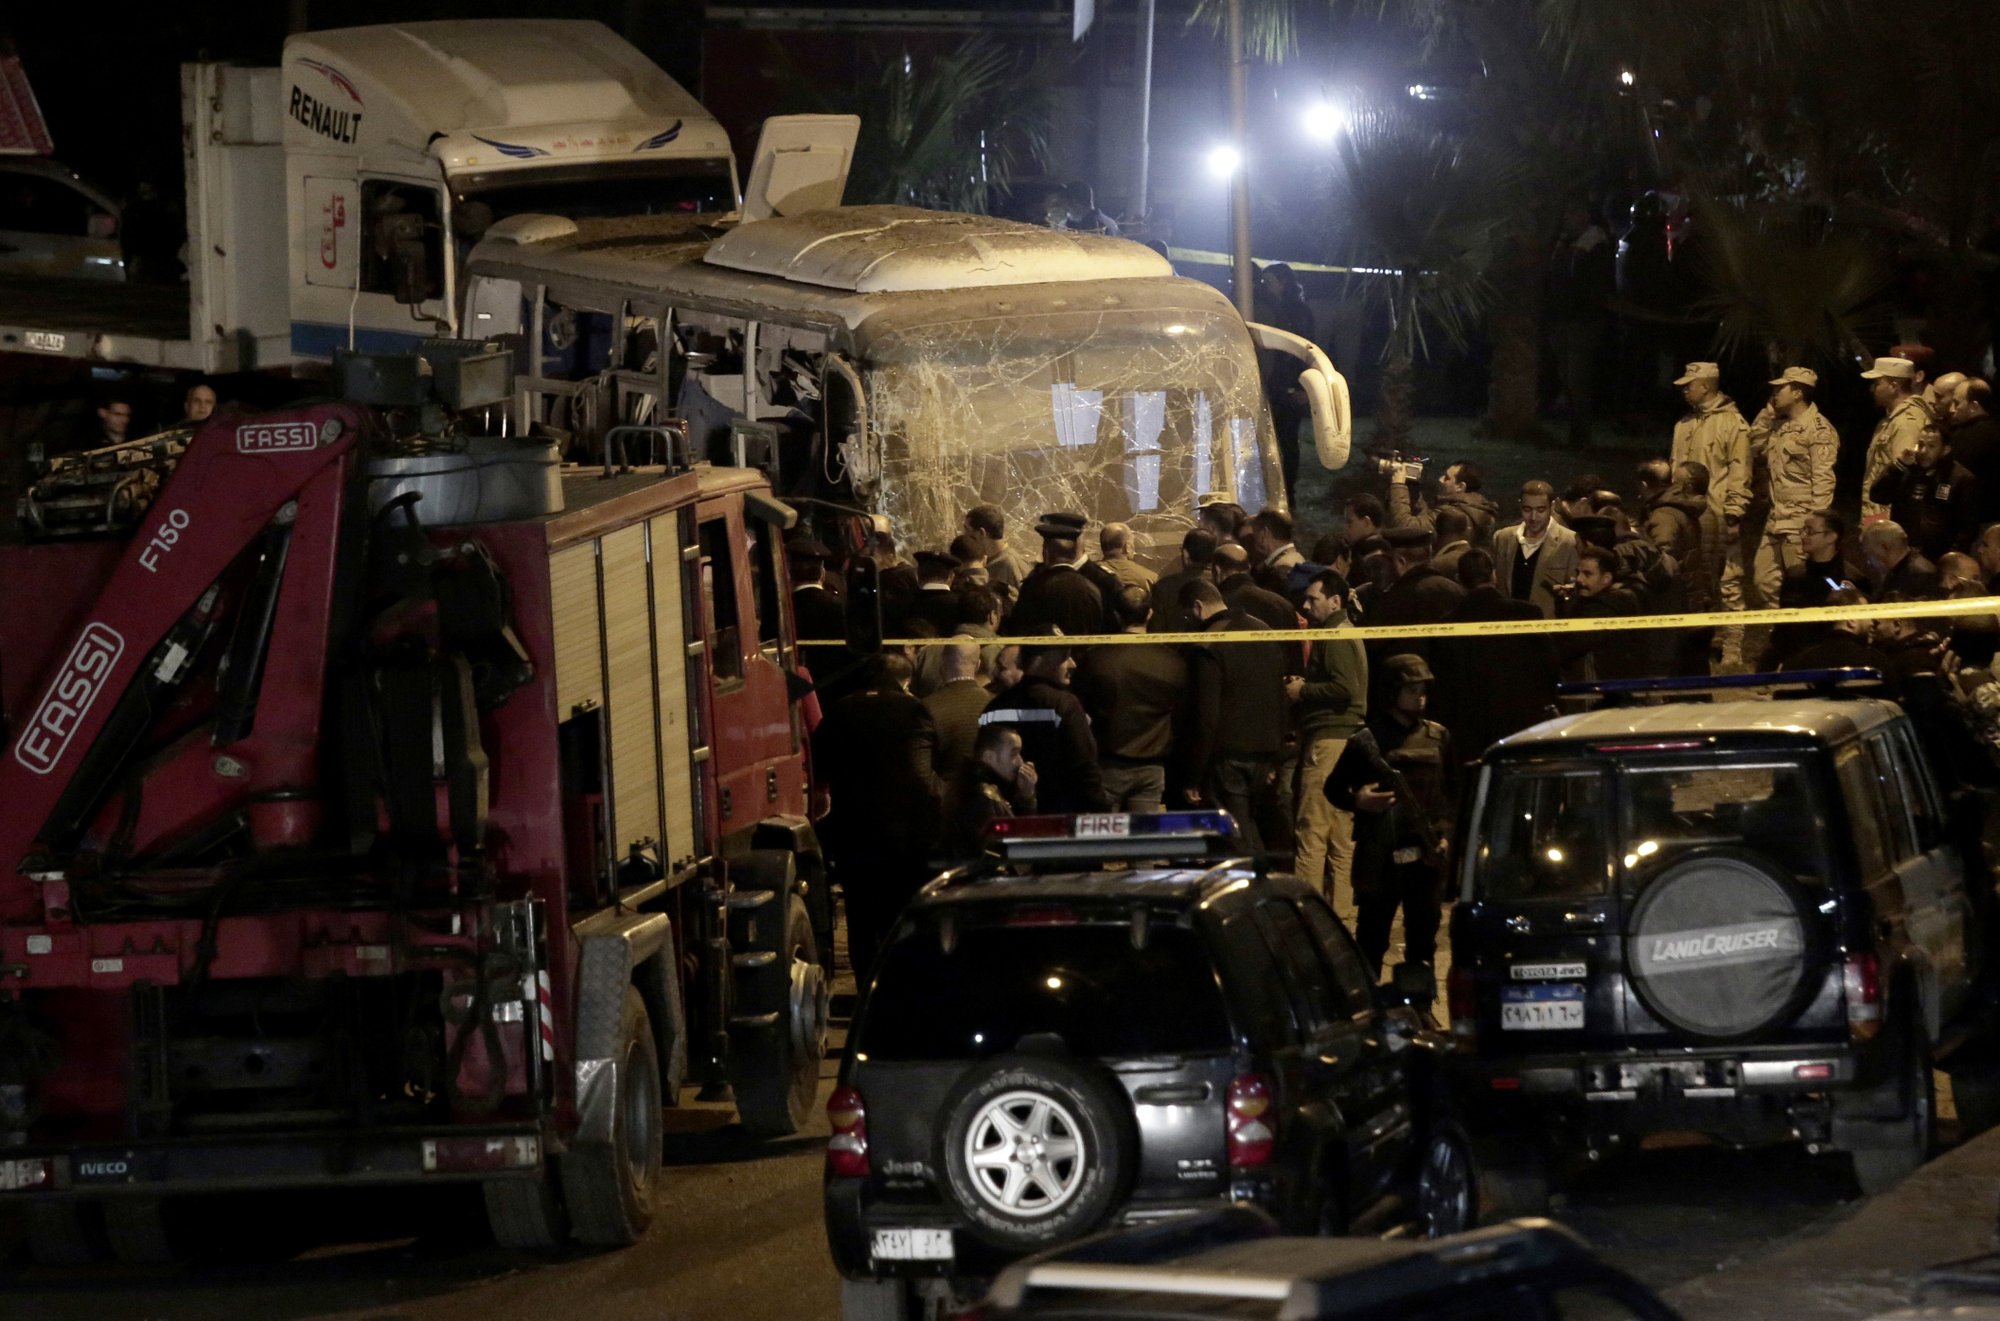 Security forces stand near a tourist bus after a roadside bomb in an area near the Giza Pyramids in Cairo, Egypt. Photo: AP